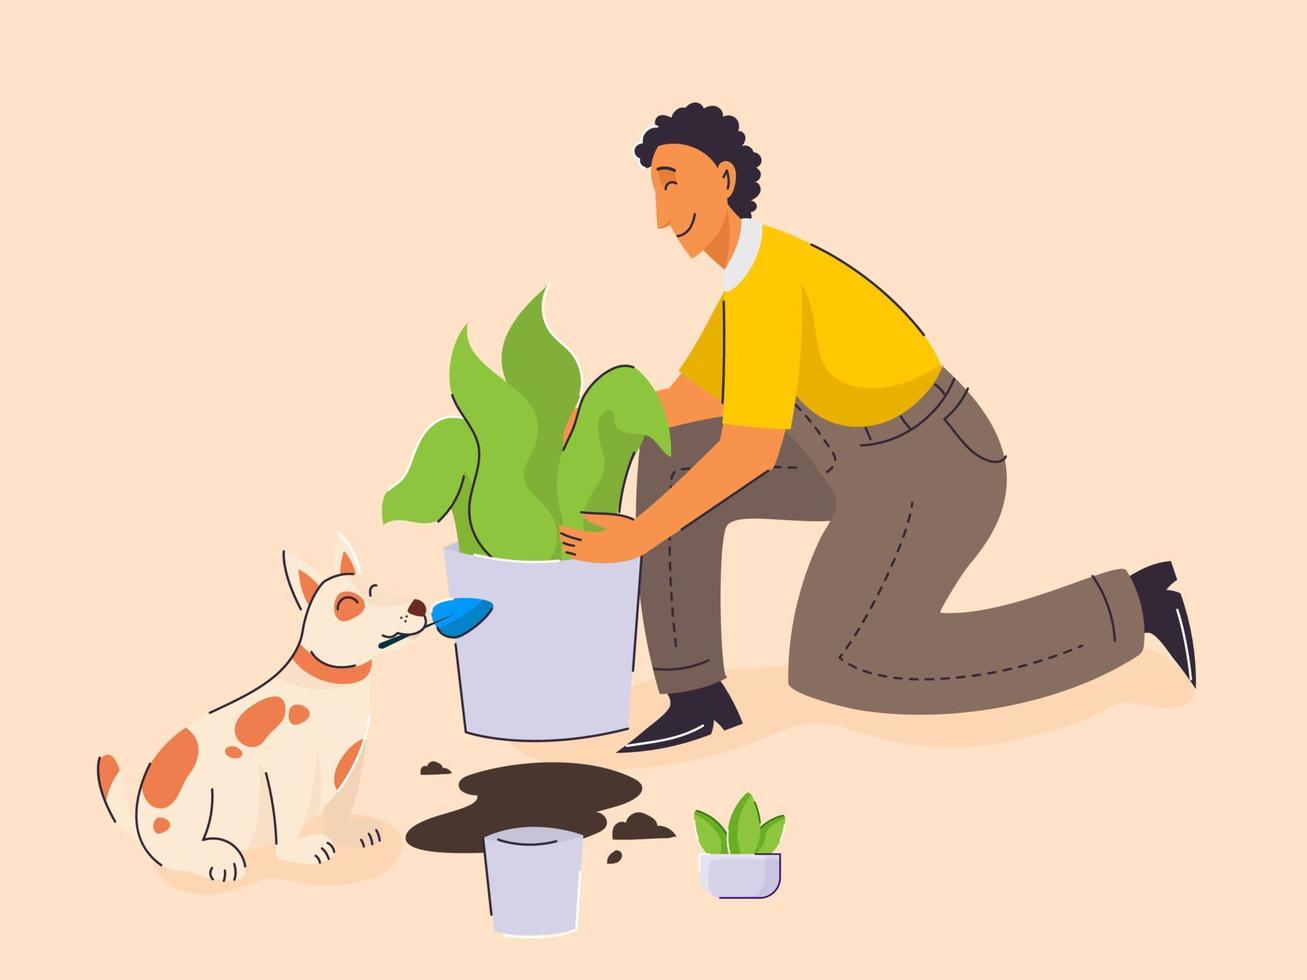 Young man taking care of plants and dog cartoon on peach background. vector